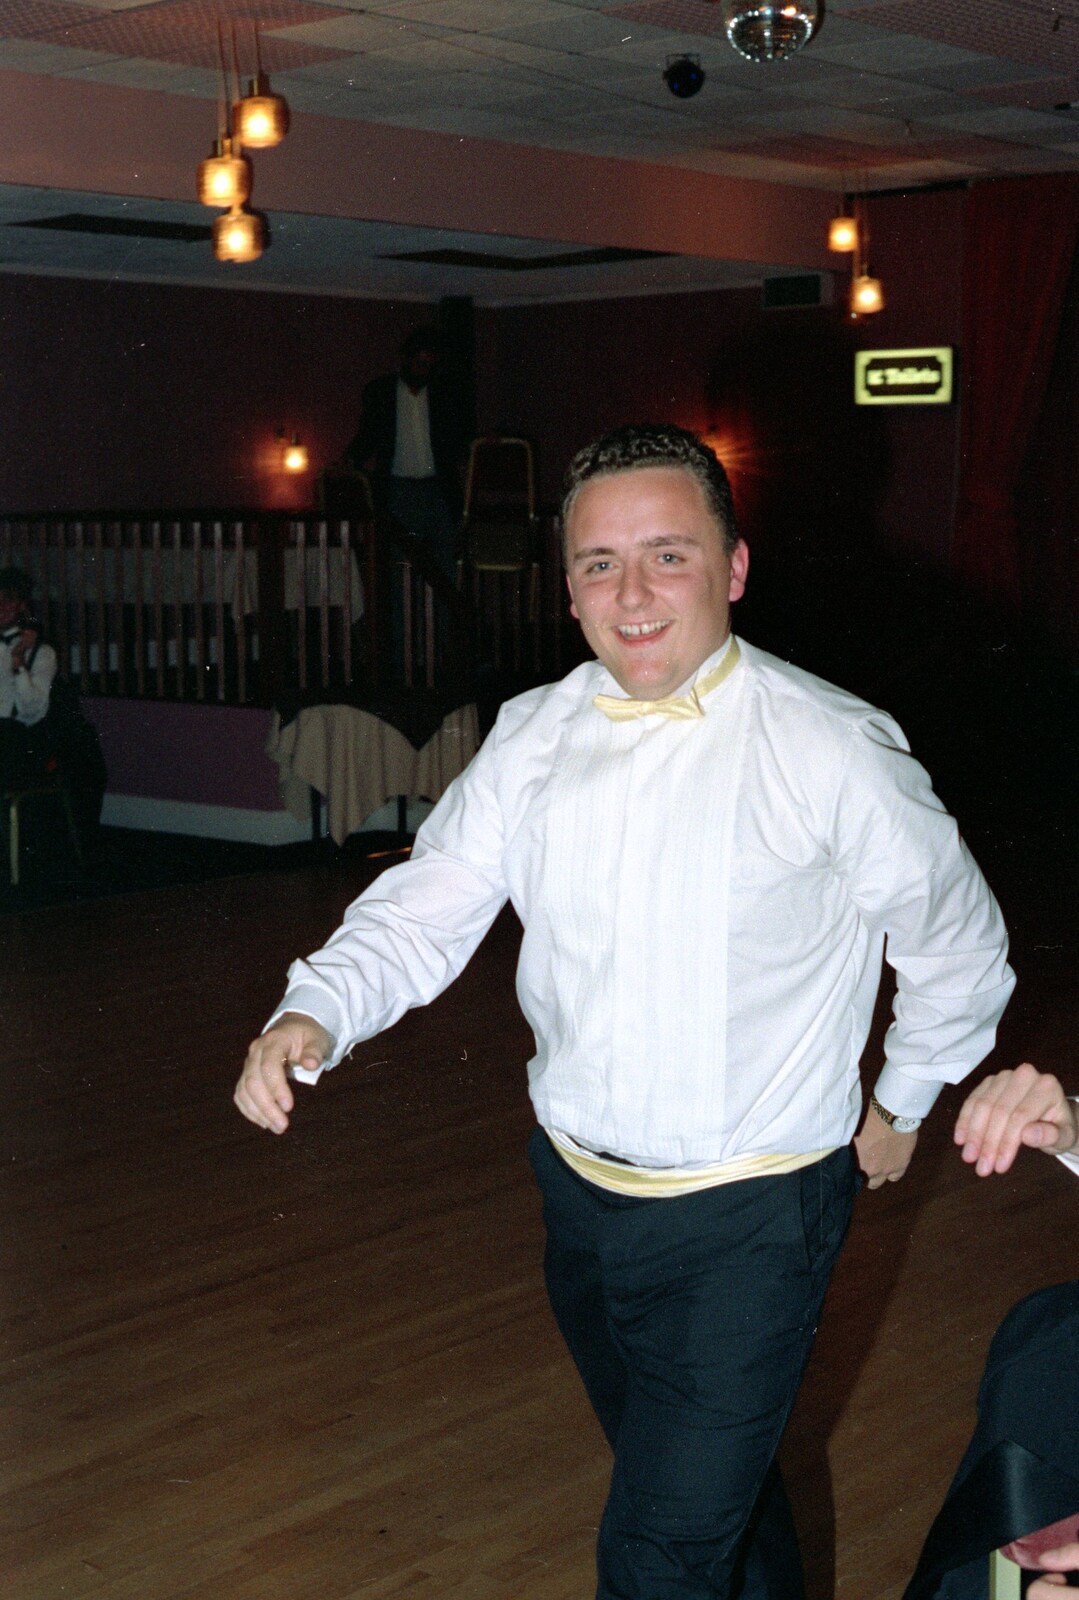 Andy Bray strides over from Uni: The BABS End-of-Course Ball, New Continental Hotel, Plymouth - 21st June 1989